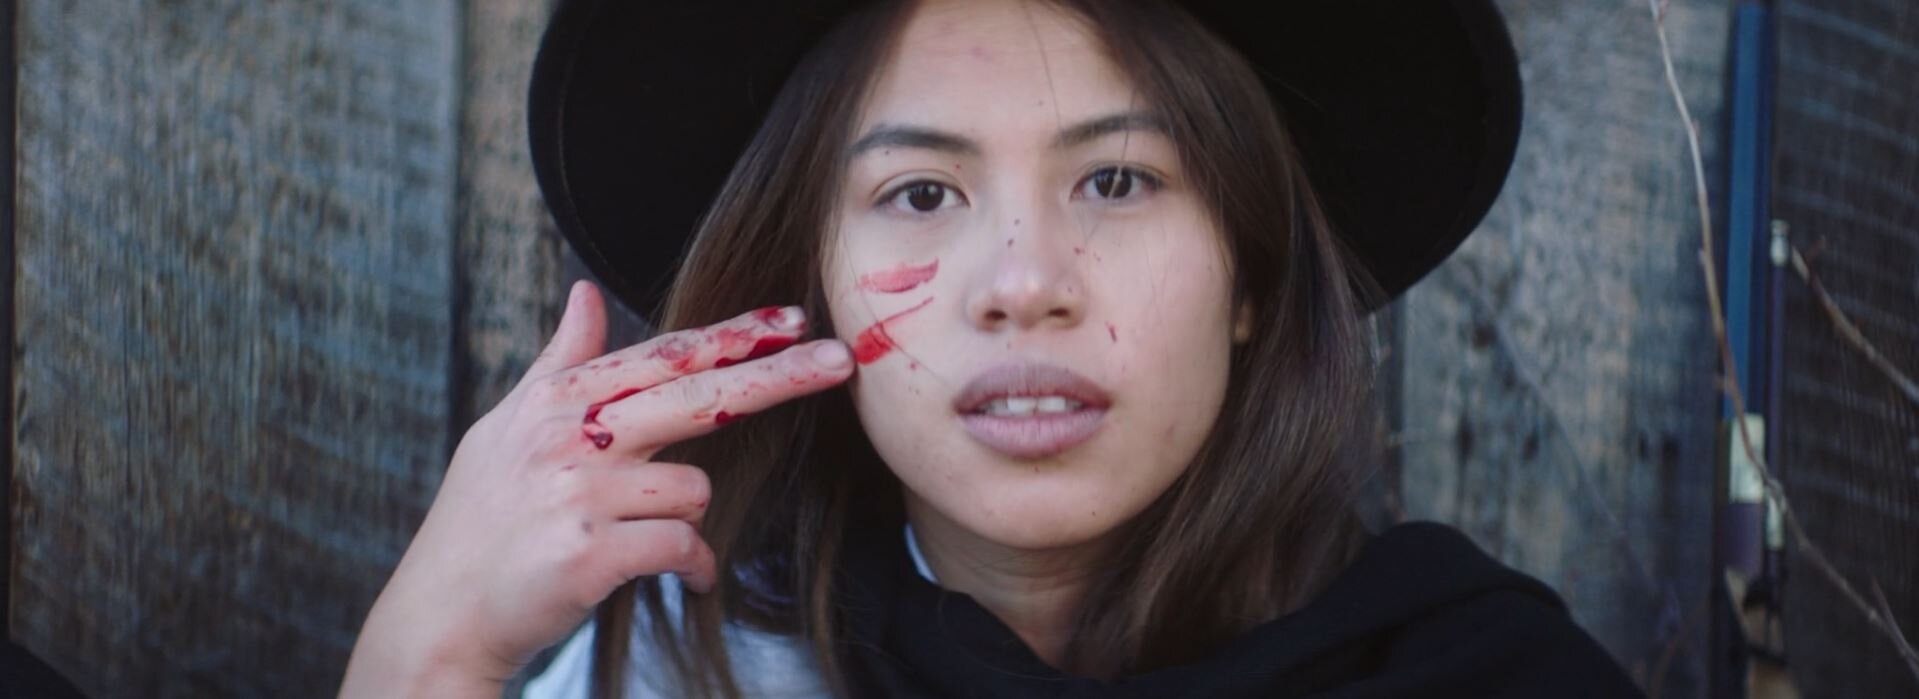  Here’s a still frame of the female lead wiping fake blood on her face in one of the scenes. The SFX artist had a blast using it for the multiple gun wounds in this spaghetti western we shot for Silo. 